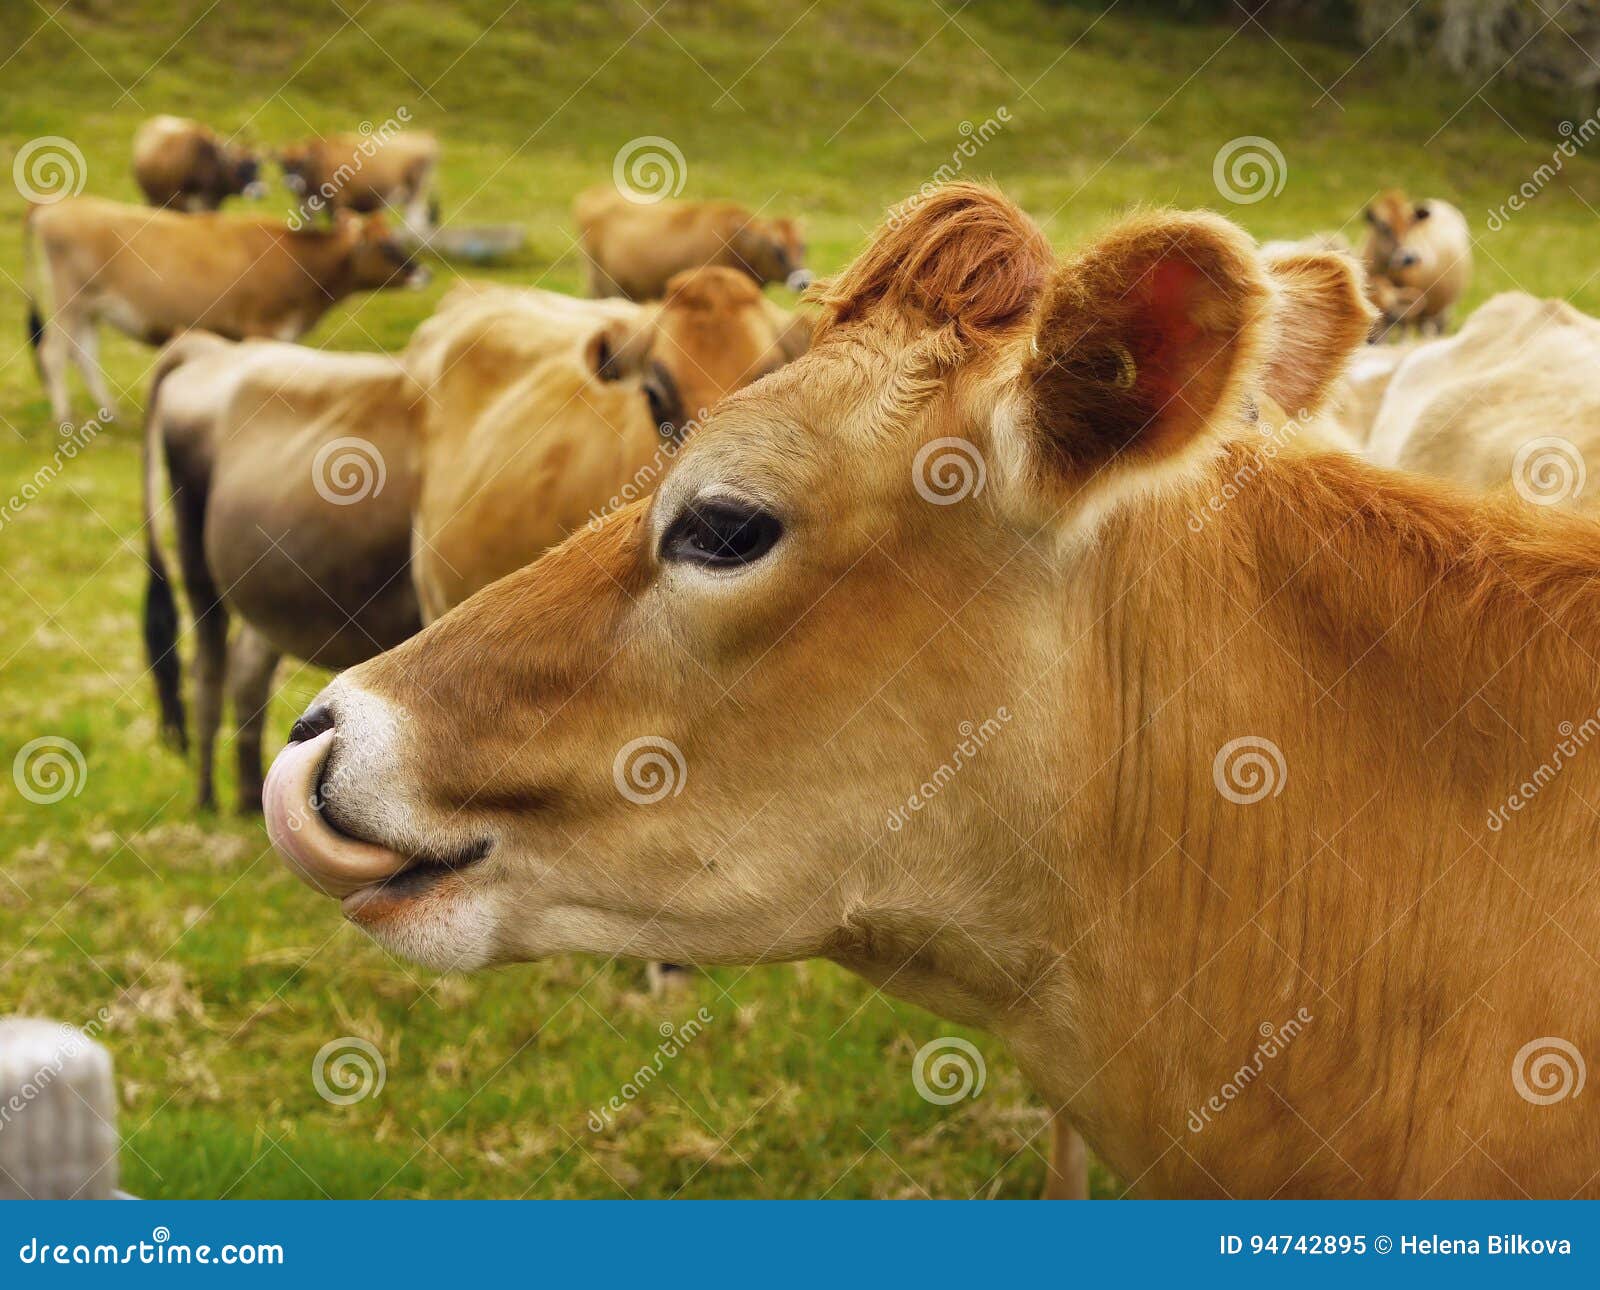 Jersey Dairy Cows, Cattle Royalty-Free Stock Photography ...